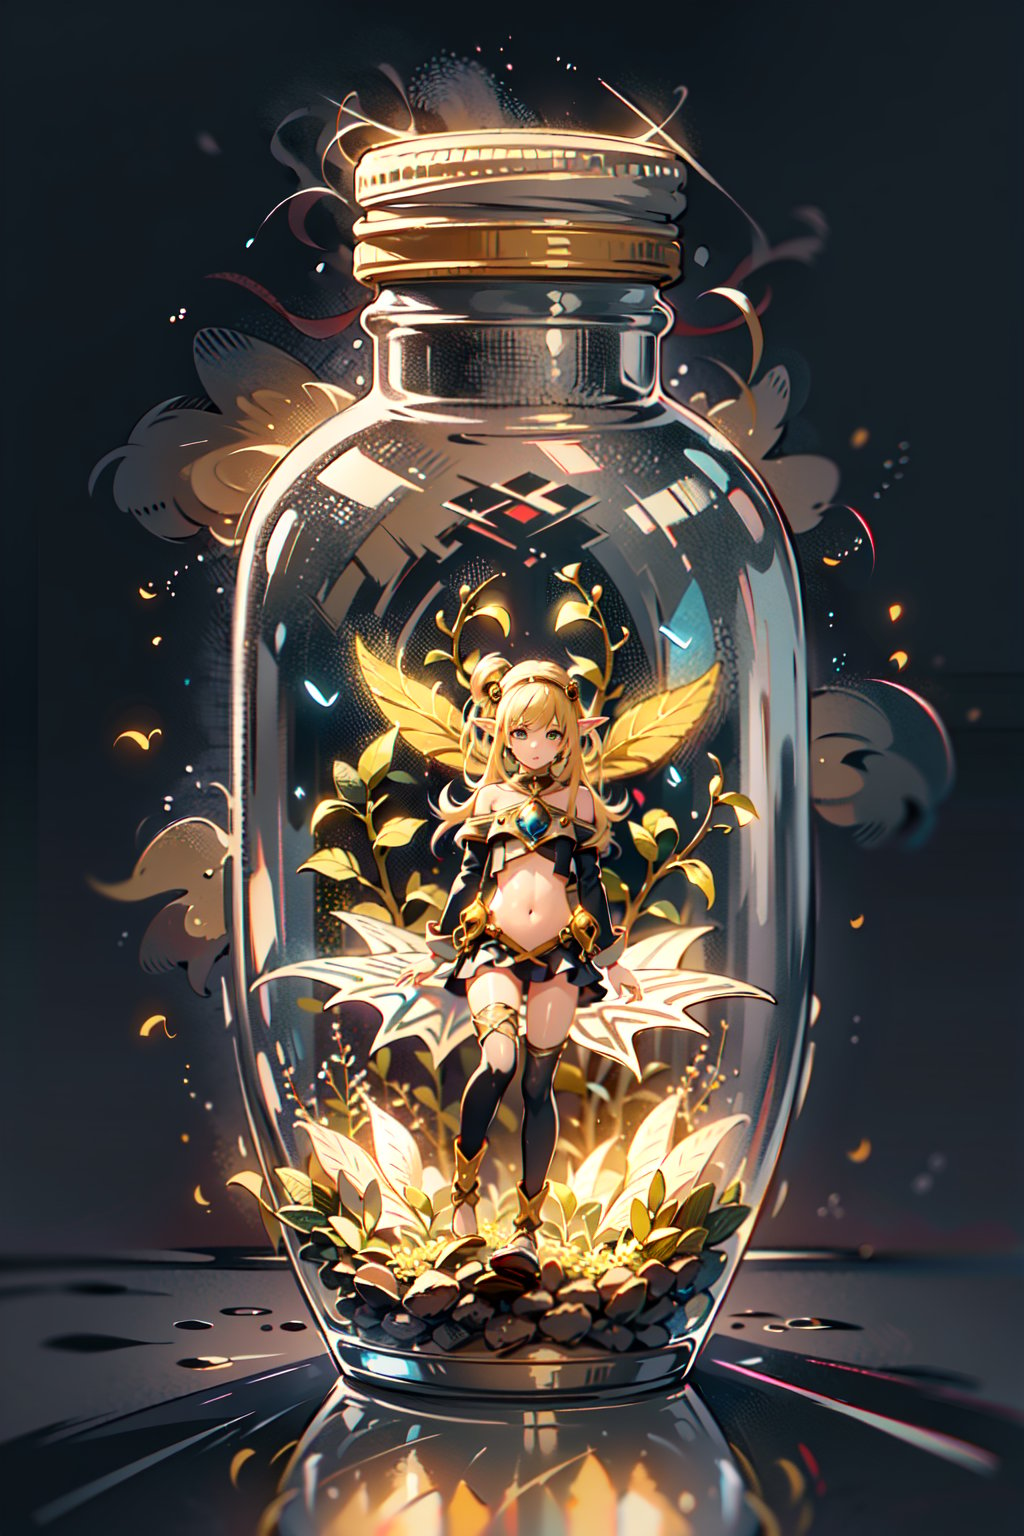 Highres, best quality, extremely detailed, area lighting in background, HD, 8k, extremely intricate:1.3), 1 girl, realistic, SMALL BODY, CUTE, GlowingRunes_yellow, stomach, elf, fairies, phgls, in container, Transparent colorless vaze, colorful flowers, warm colors, softly painted, very dark background, impressionistic, abstract, 